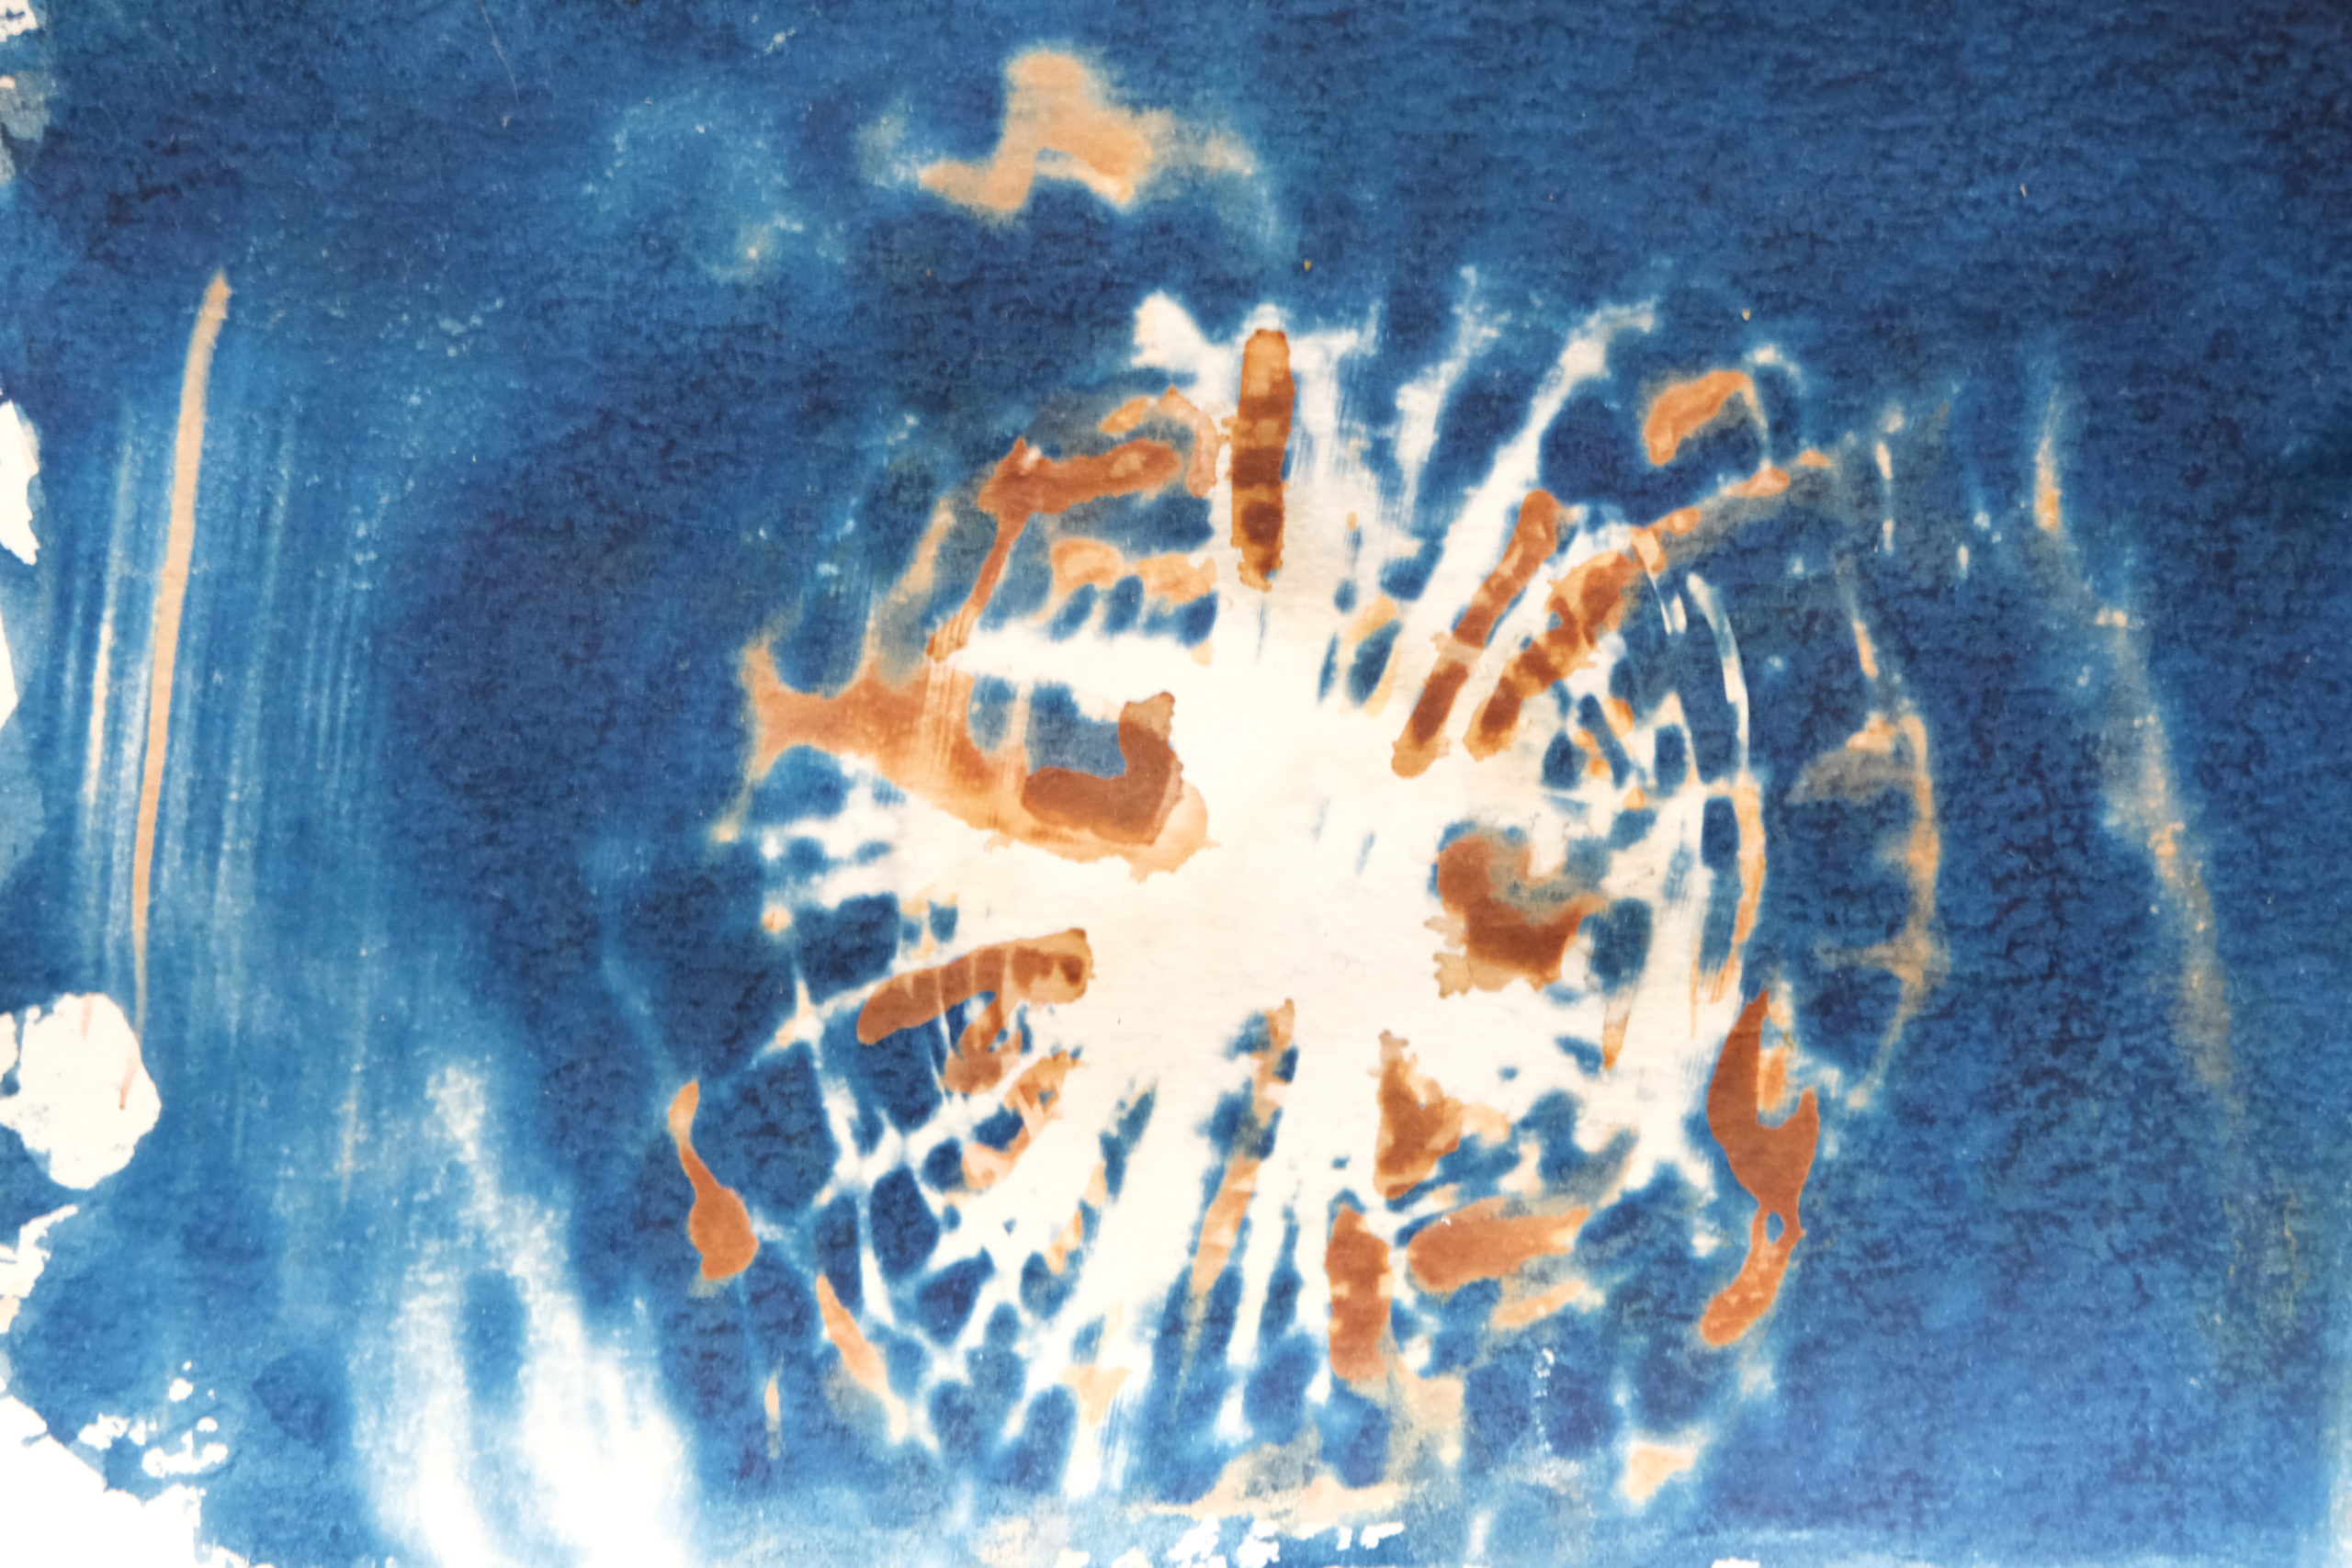 the same cyanotype but with select areas bleached and toned with silver nitrate so that some of the blue spaces between the webbing are tinted brown. The toning is a light brown over the previously white spaces and a medium brown over the previously blue spaces